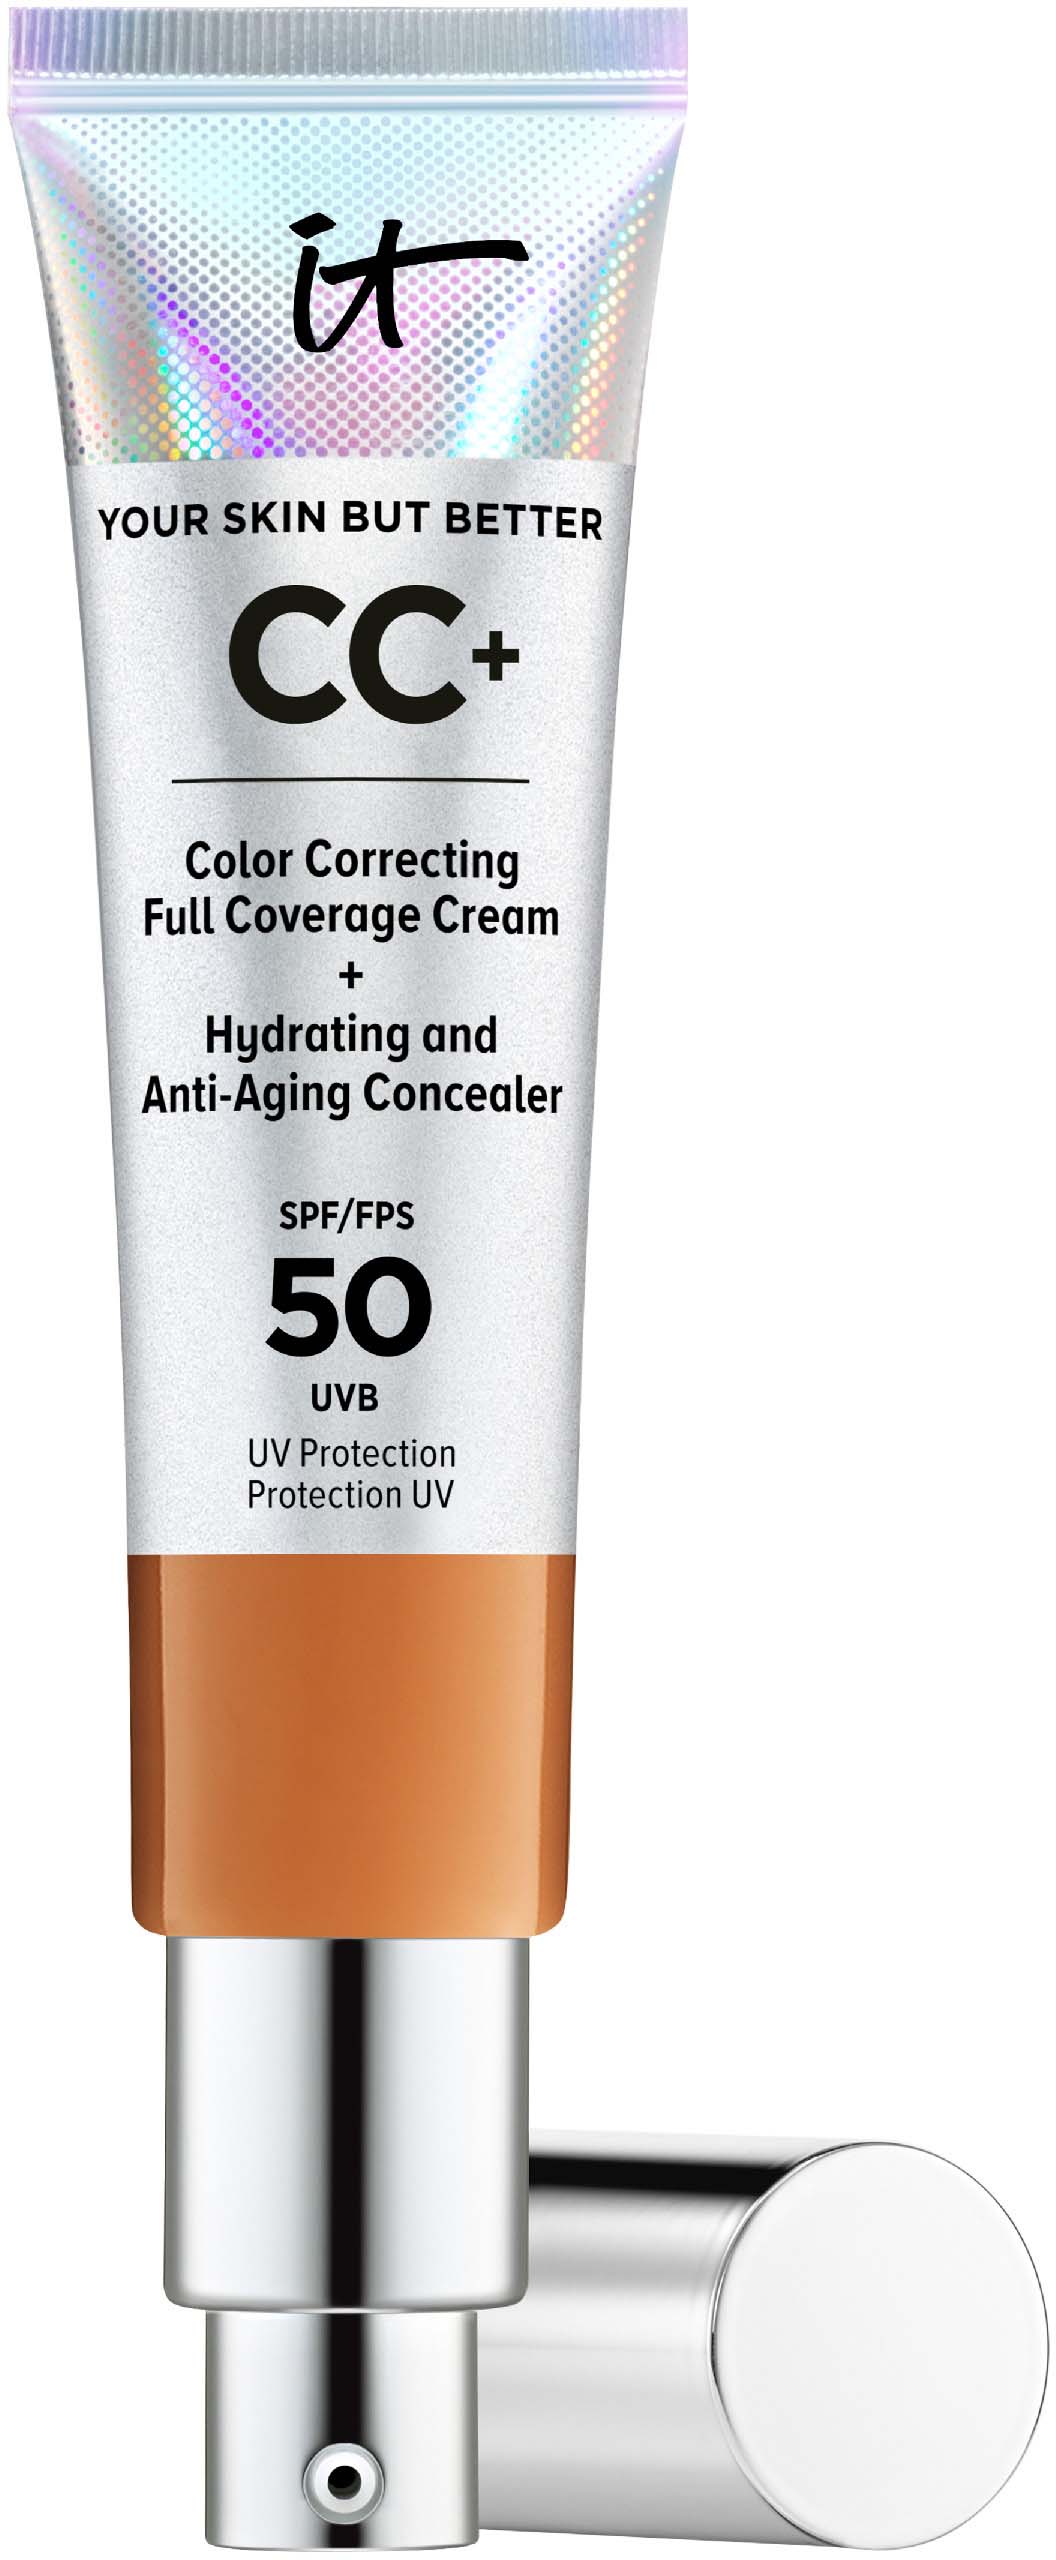 IT cosmetics Your Skin But Better CC+ Full Coverage Cream -1.08oz